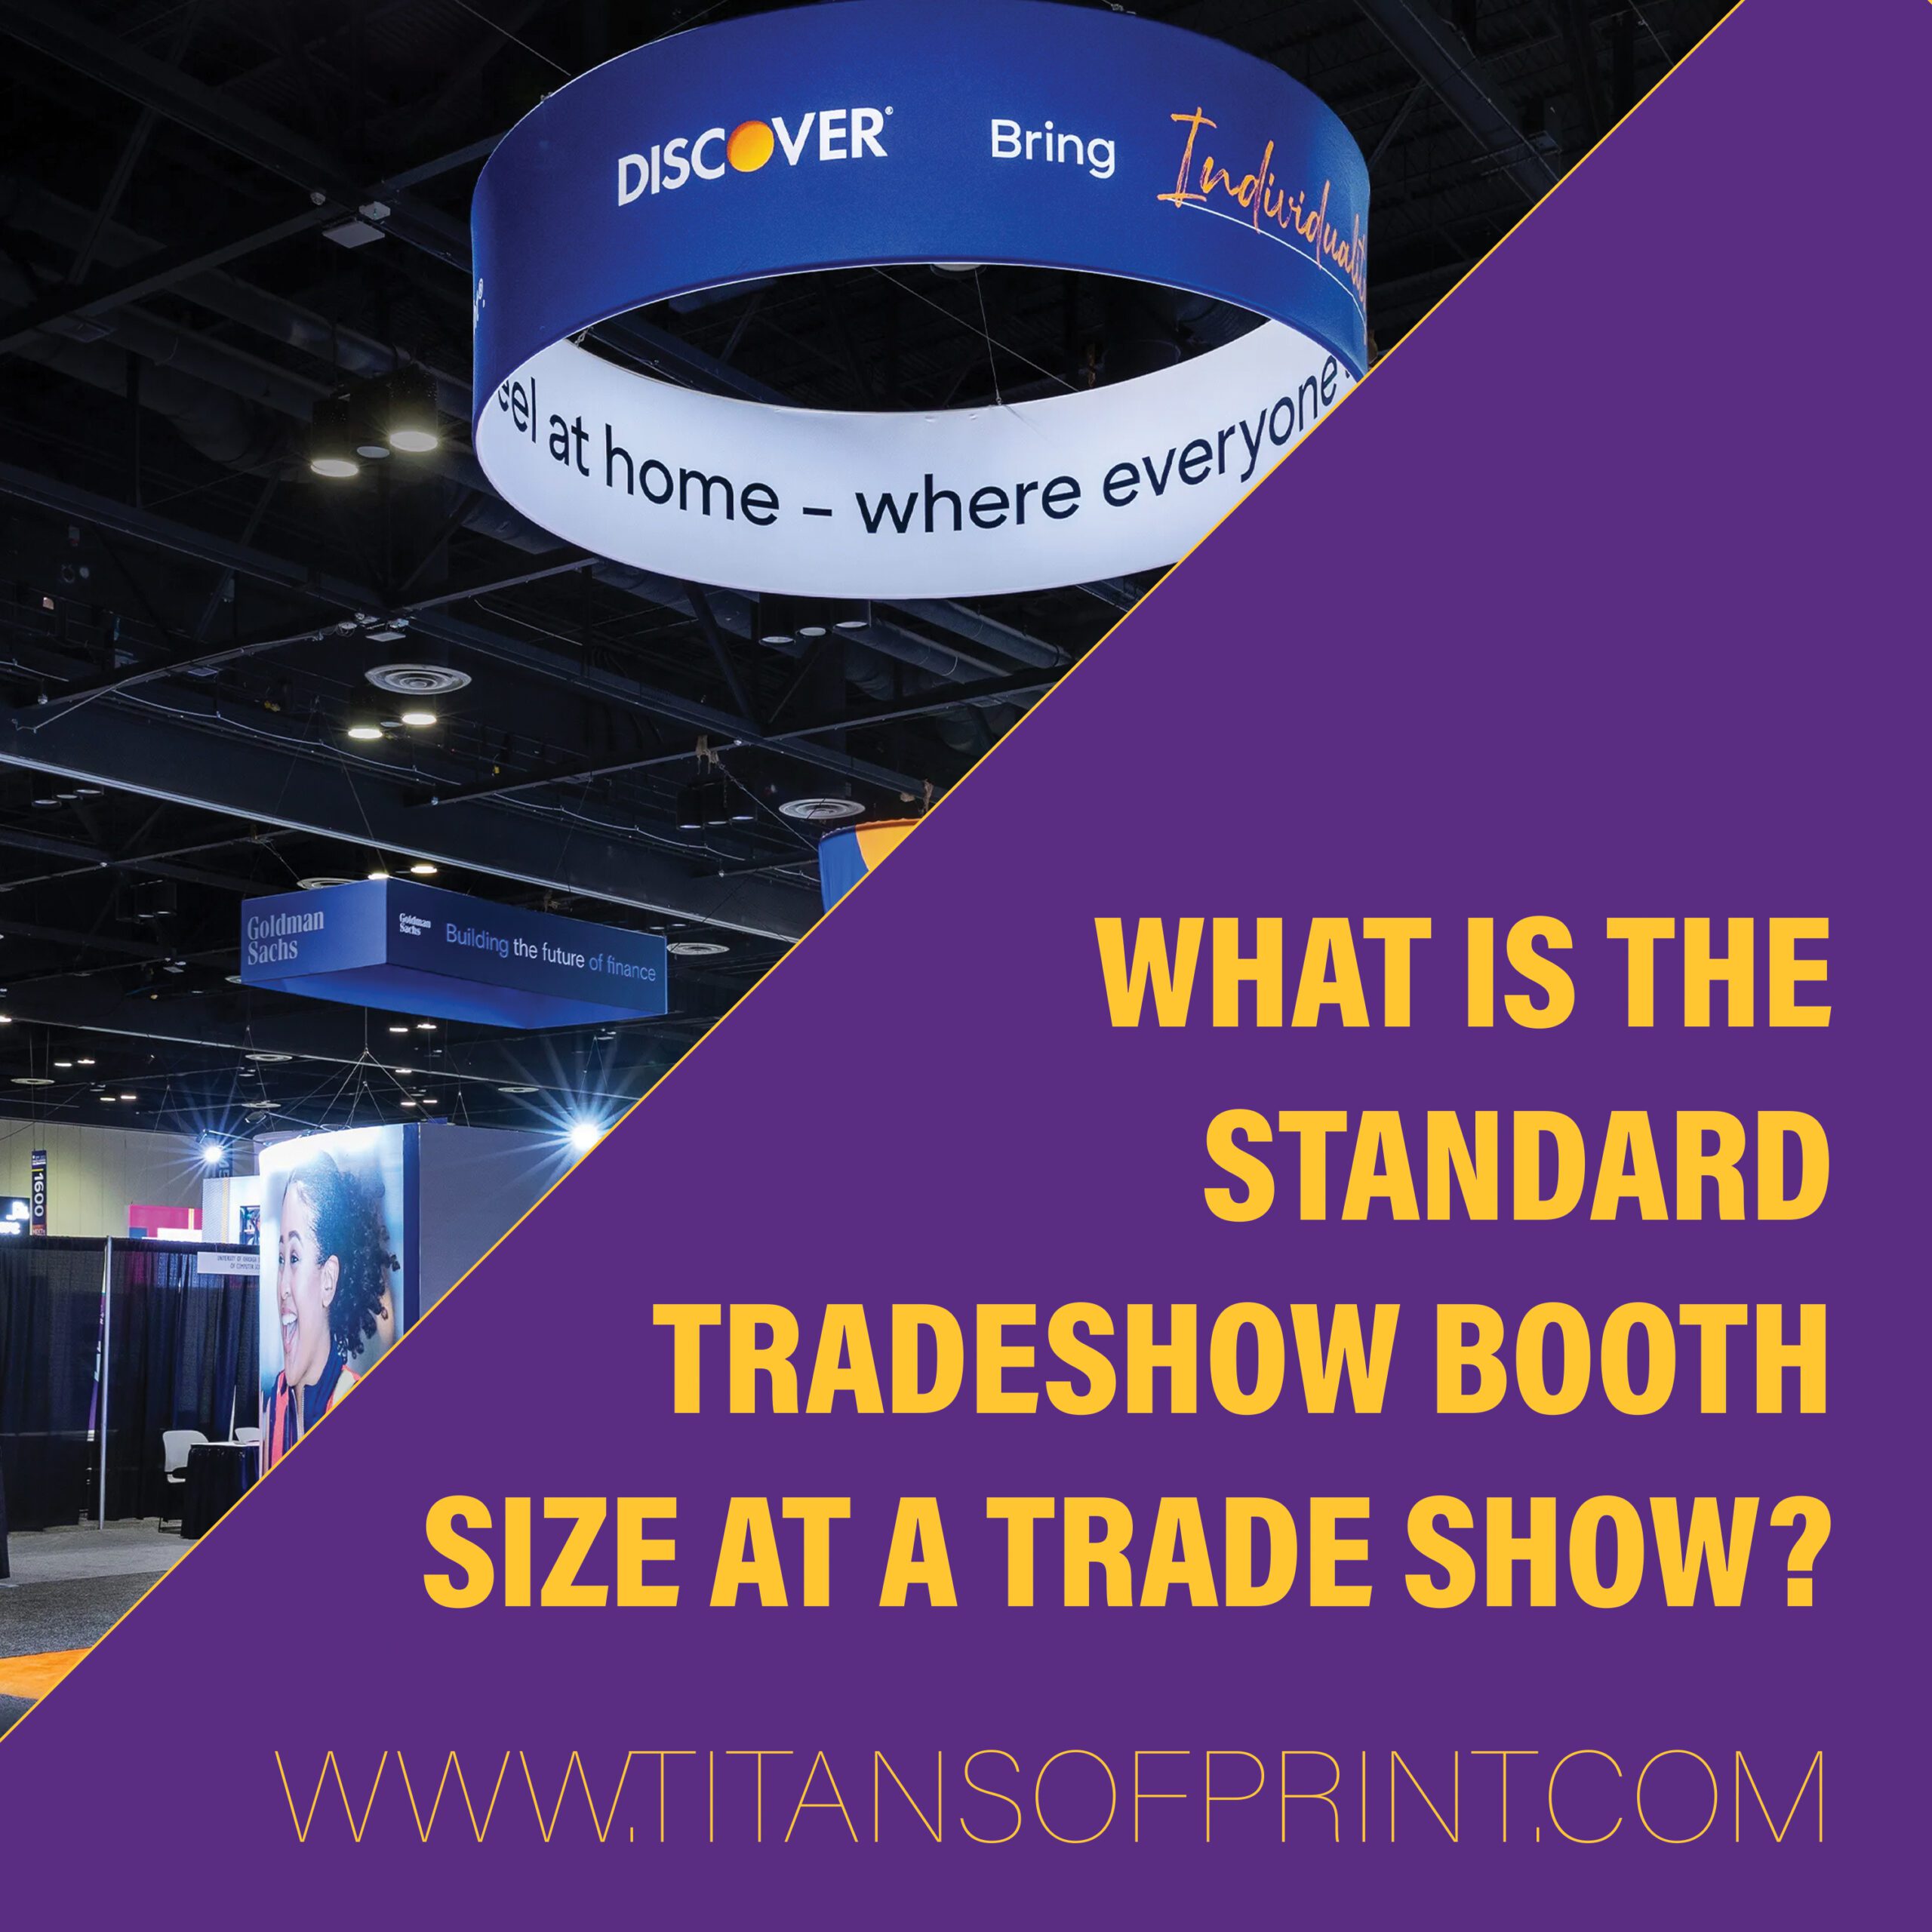 What Is The Standard Tradeshow Booth Size At A Trade Show?